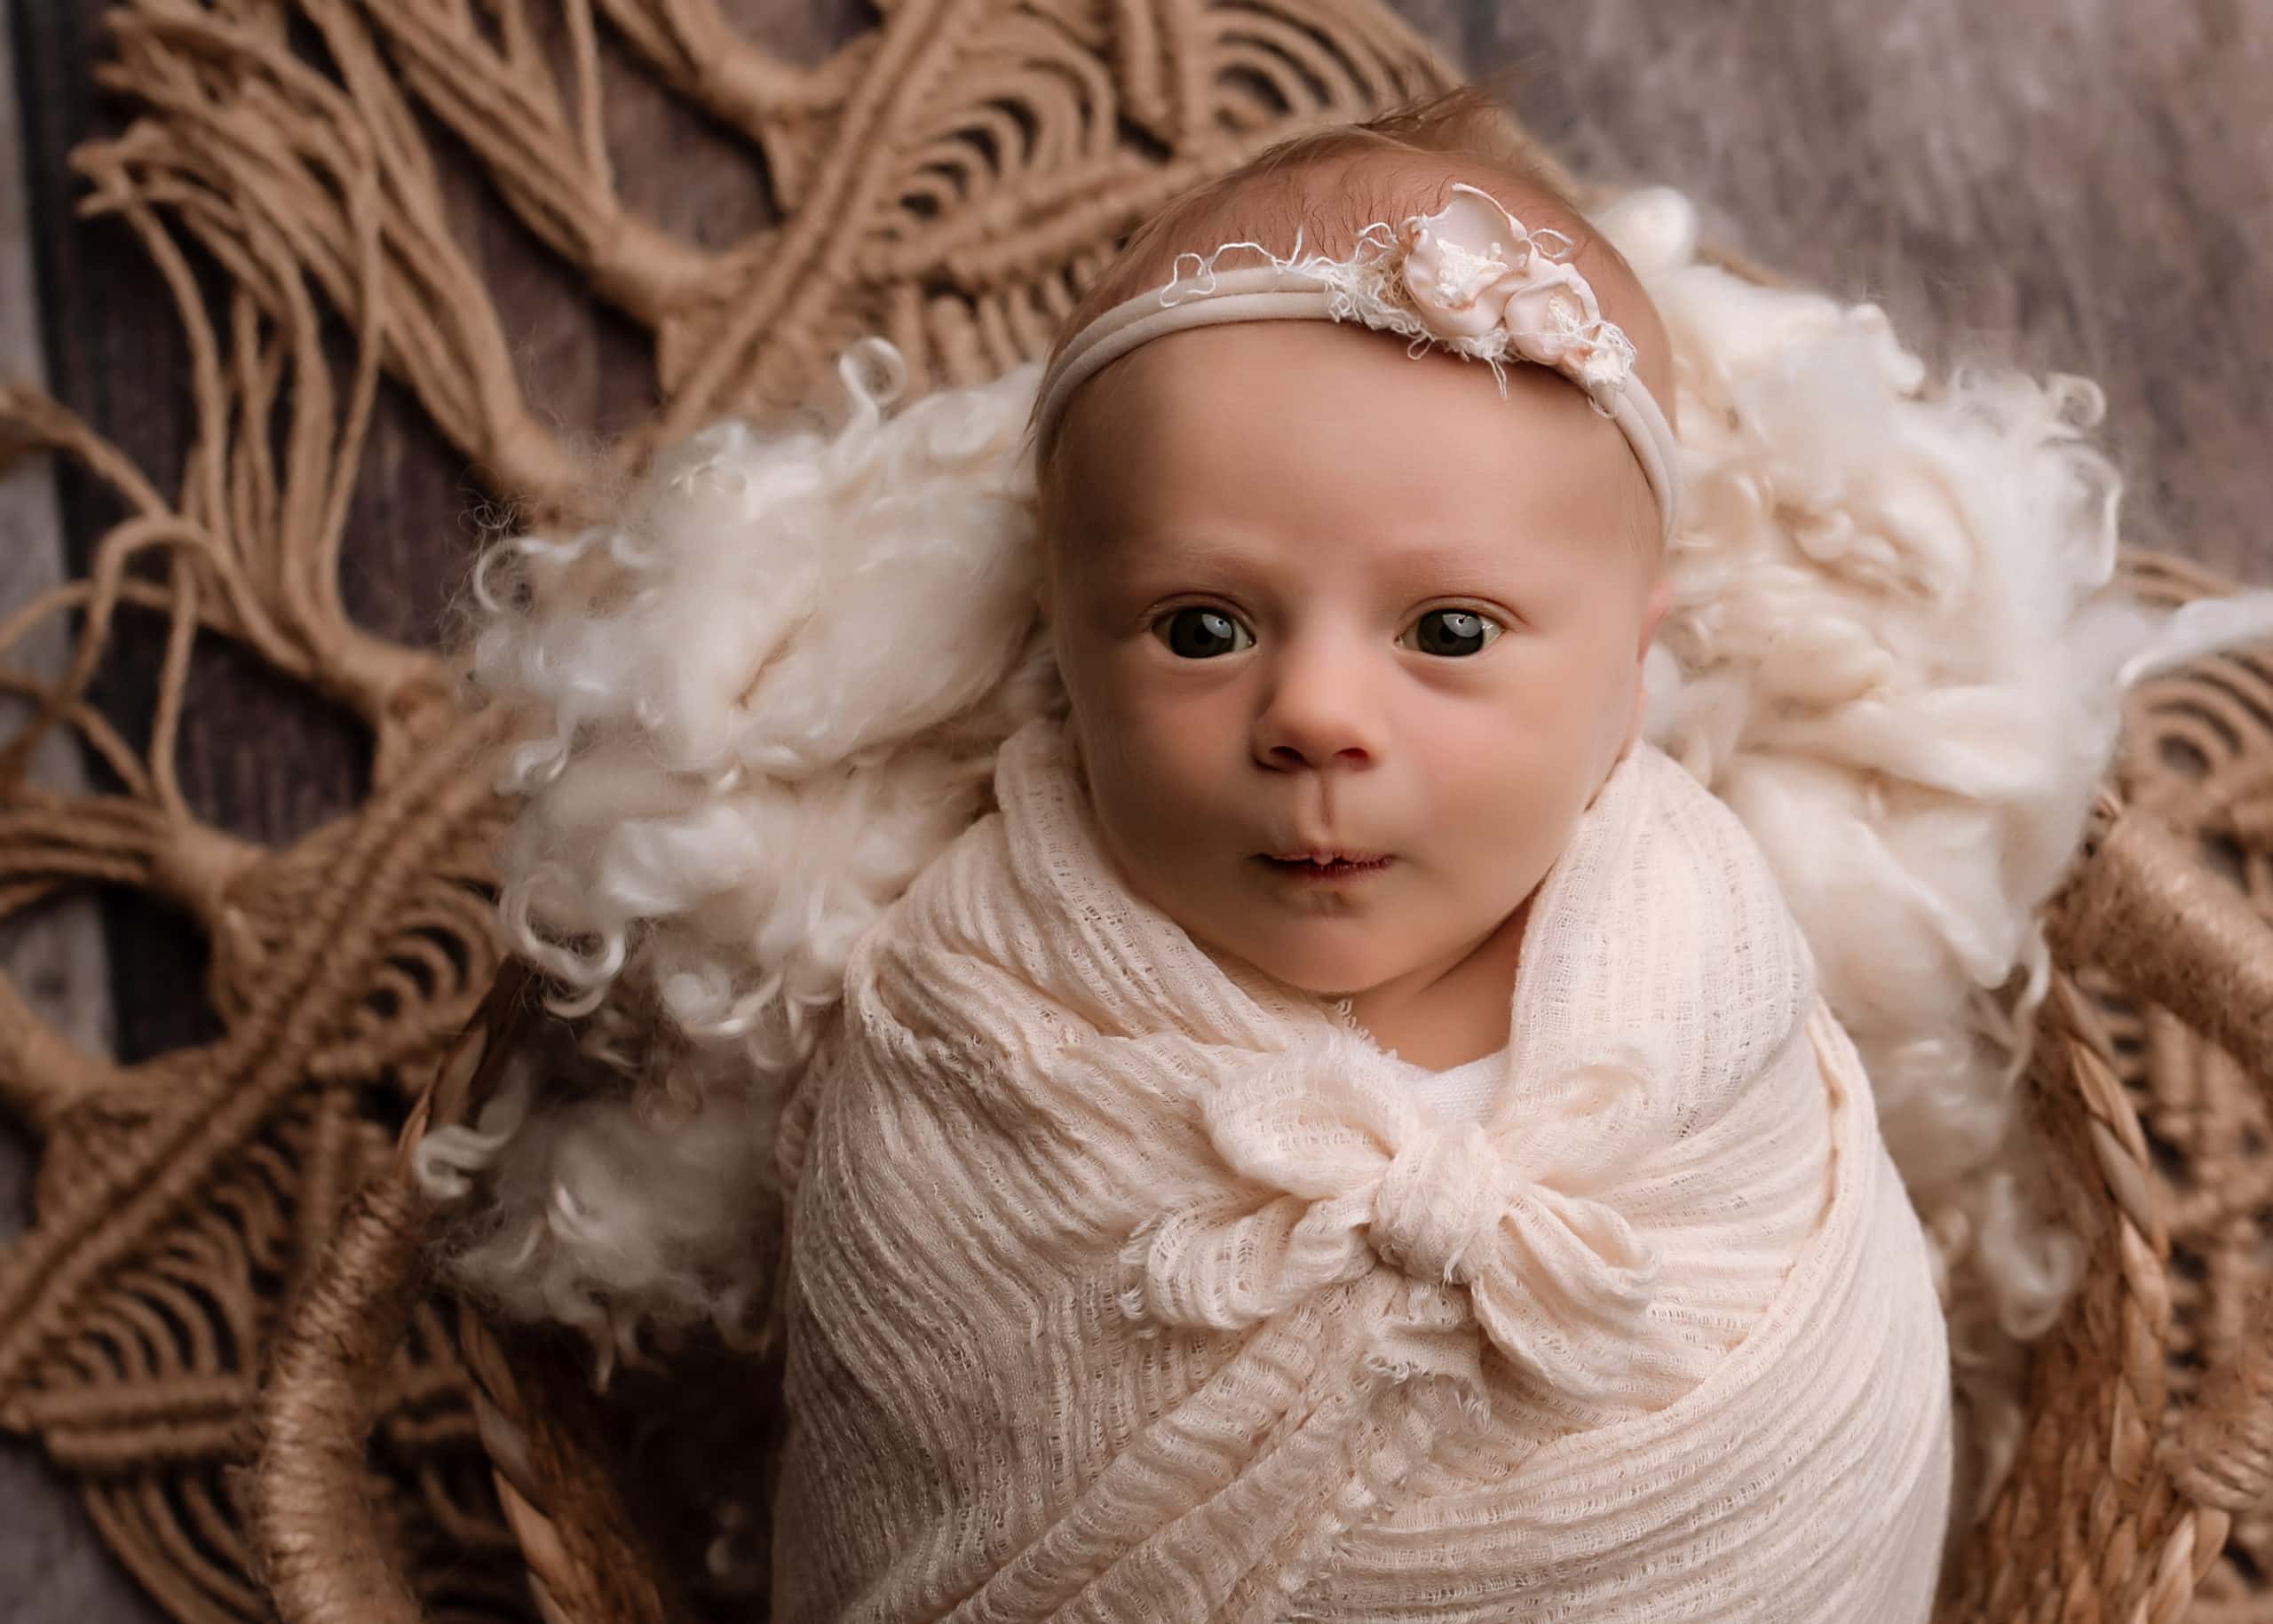 wide awake starring at the photographer, professional newborn photography in Prince George